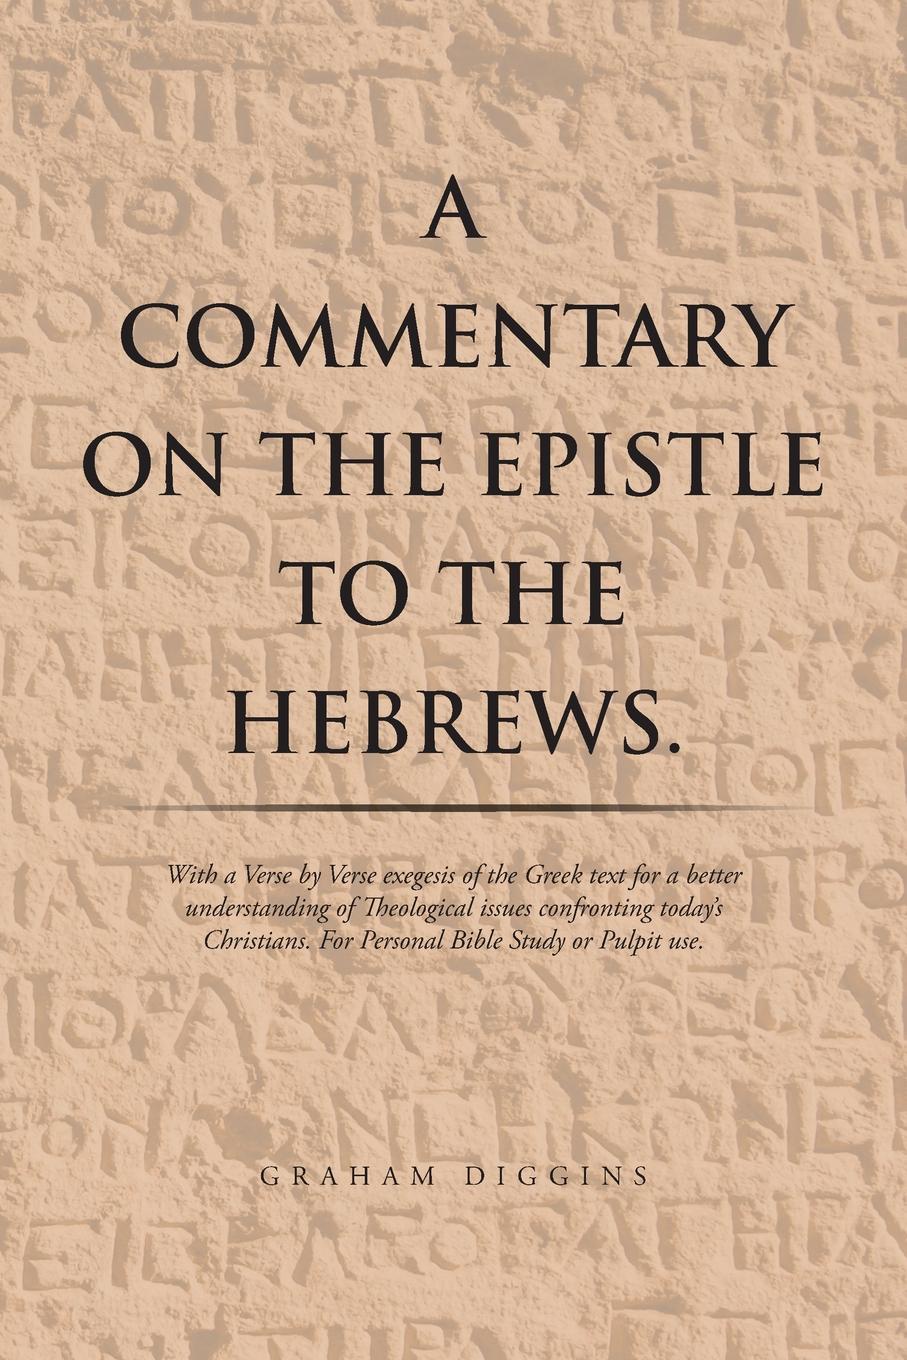 A Commentary on the Epistle to the Hebrews. With a Verse by Verse Exegesis of the Greek Text for a Better Understanding of Theological Issues Confronting Today`s Christians. For Personal Bible Study or Pulpit Use.